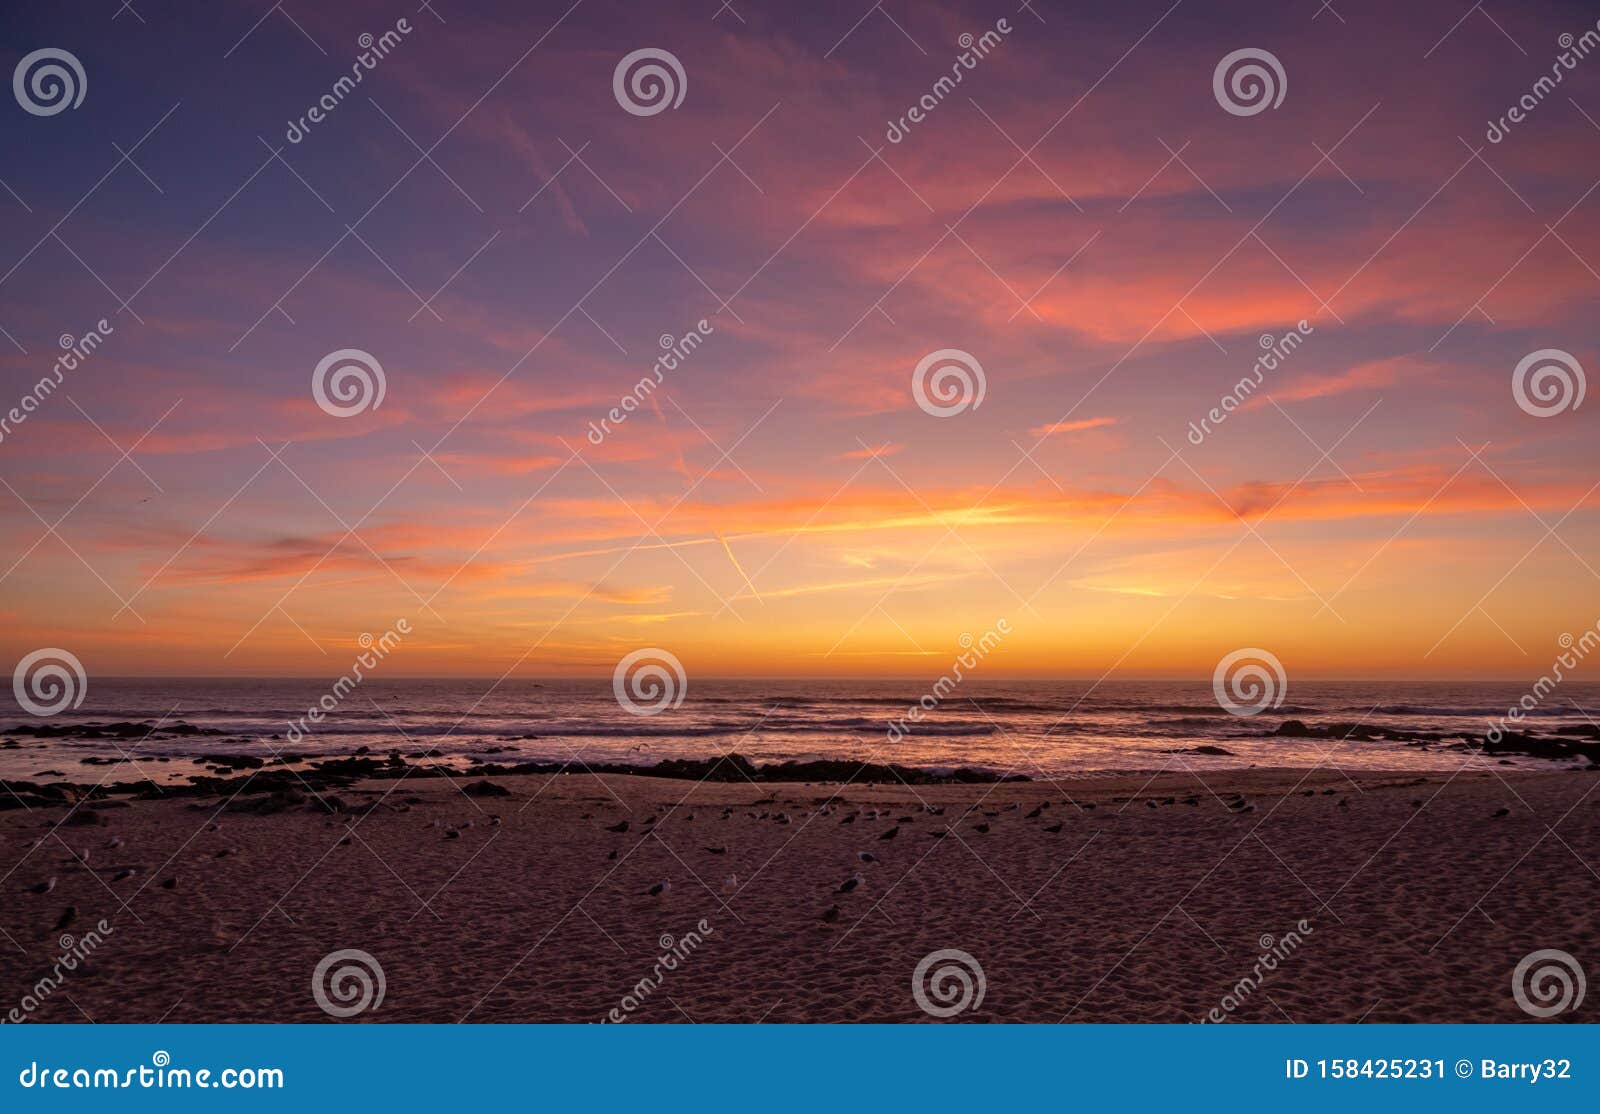 Beautiful Vivid Sunset Sky Over Ocean With Red Clouds And Blue Yellow